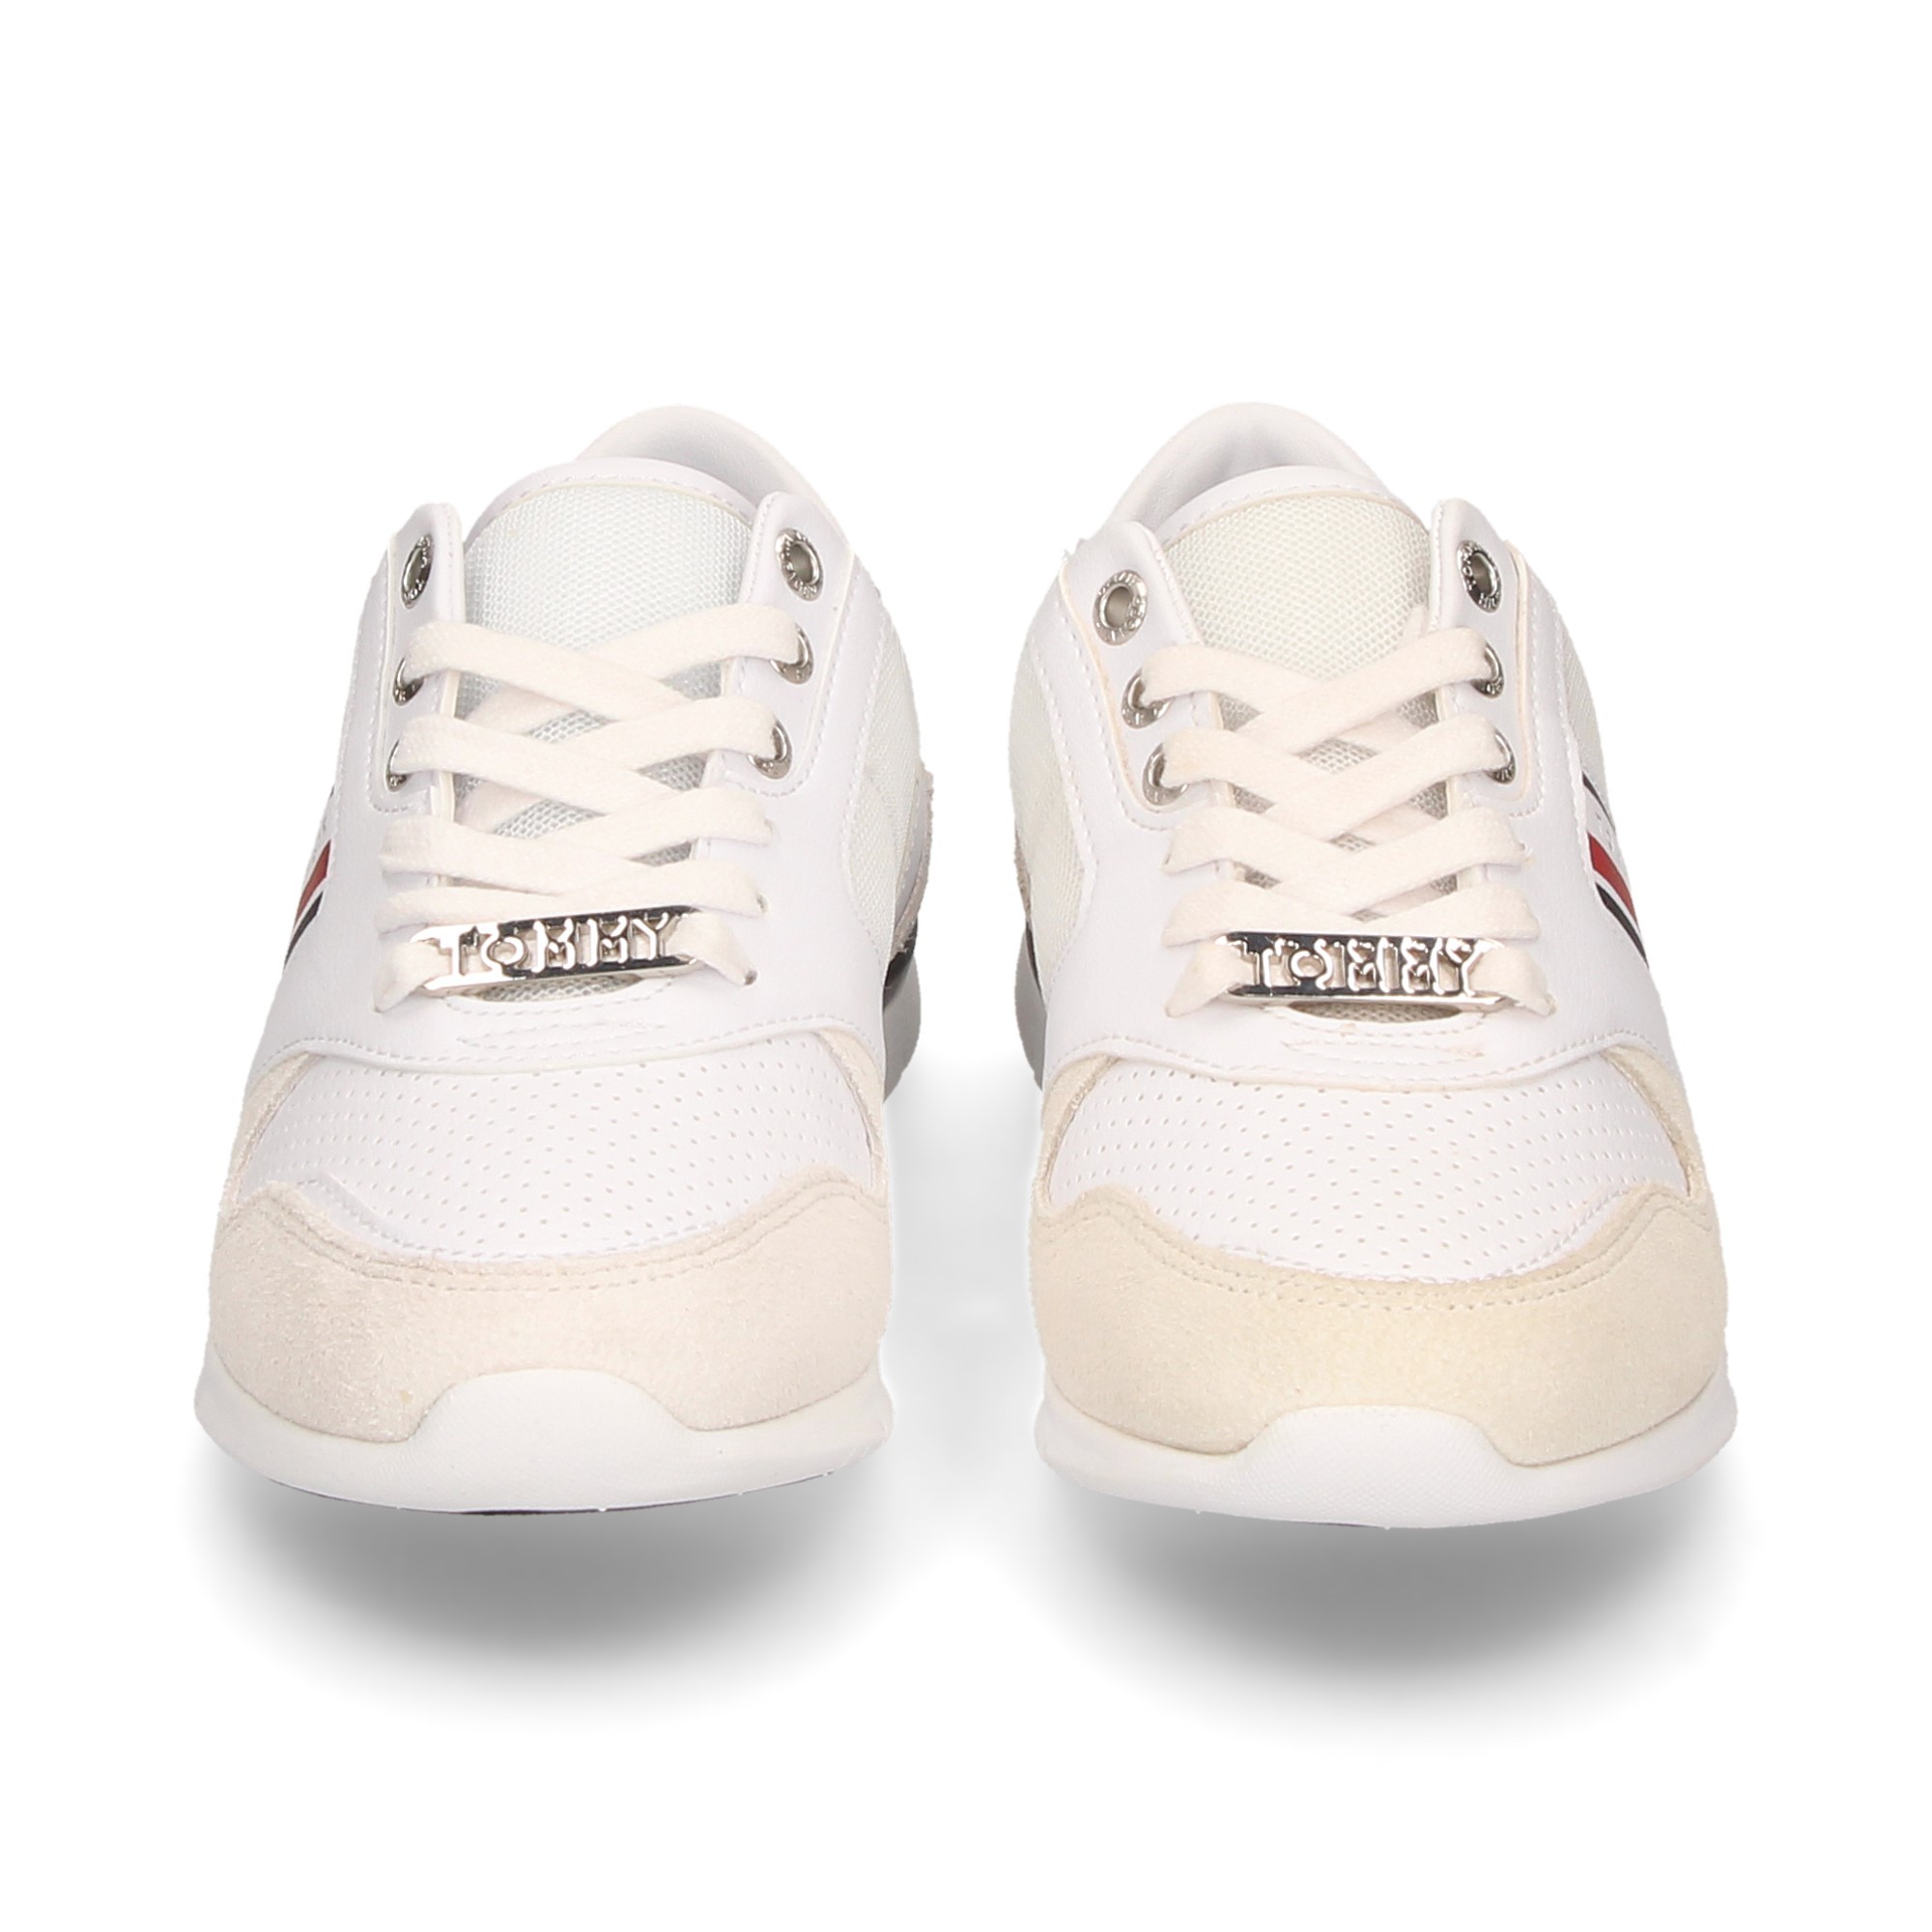 sporty-suede-white-perforated-skin